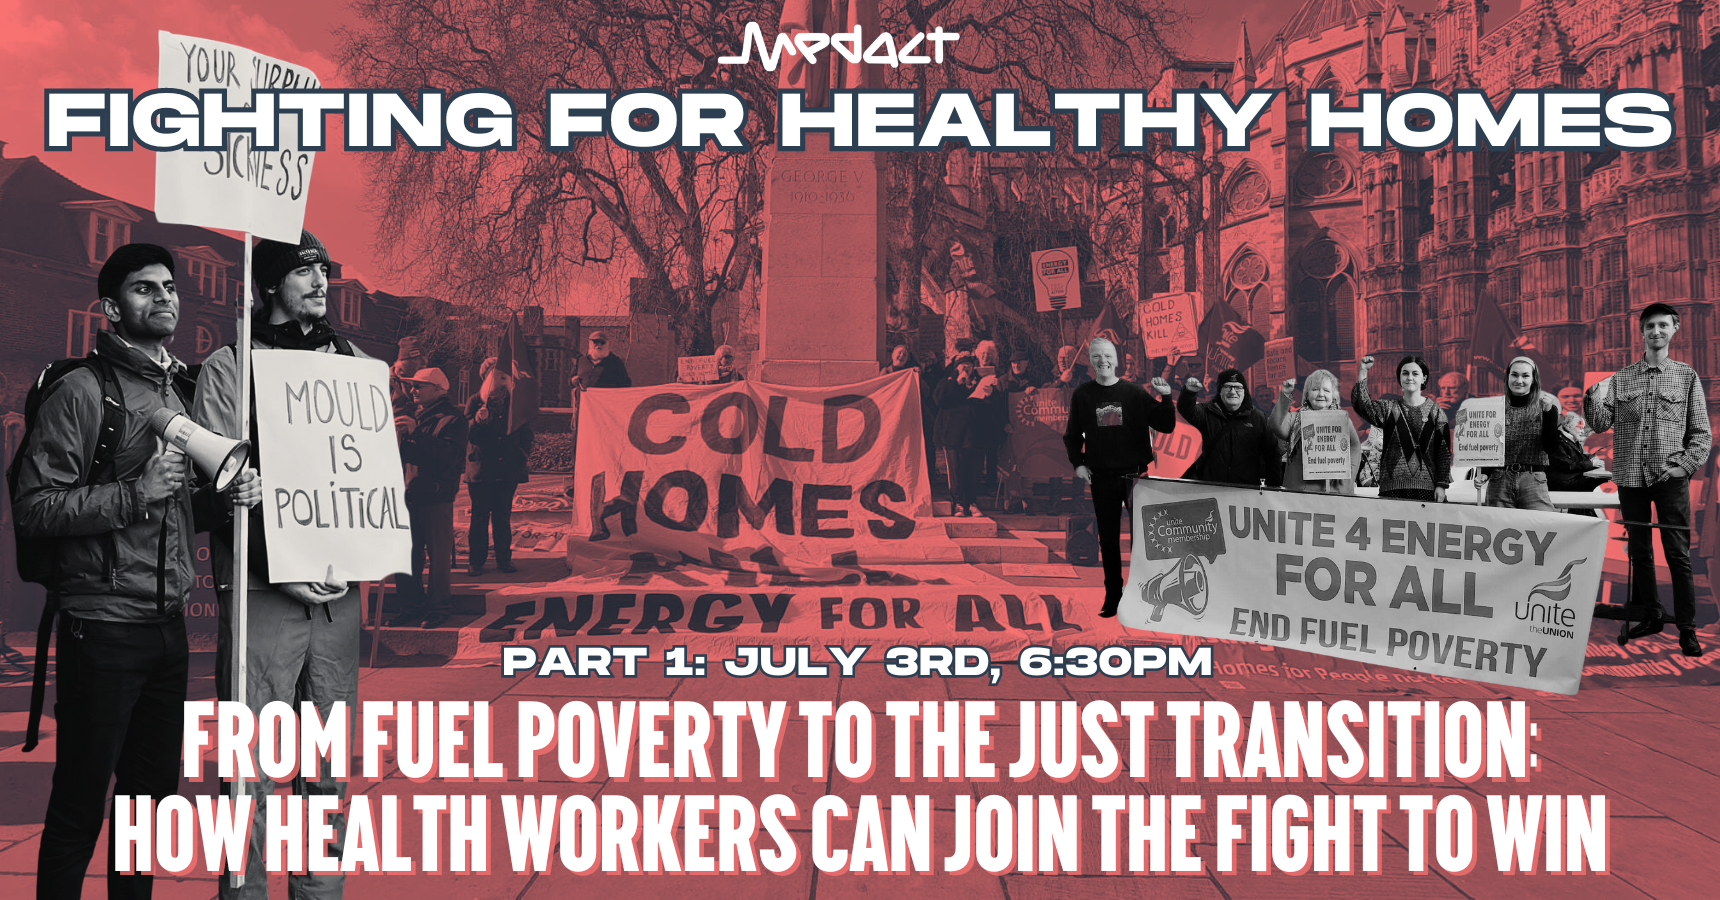 From Fuel Poverty to the Just Transition: How Health Workers Can Join the Fight to Win